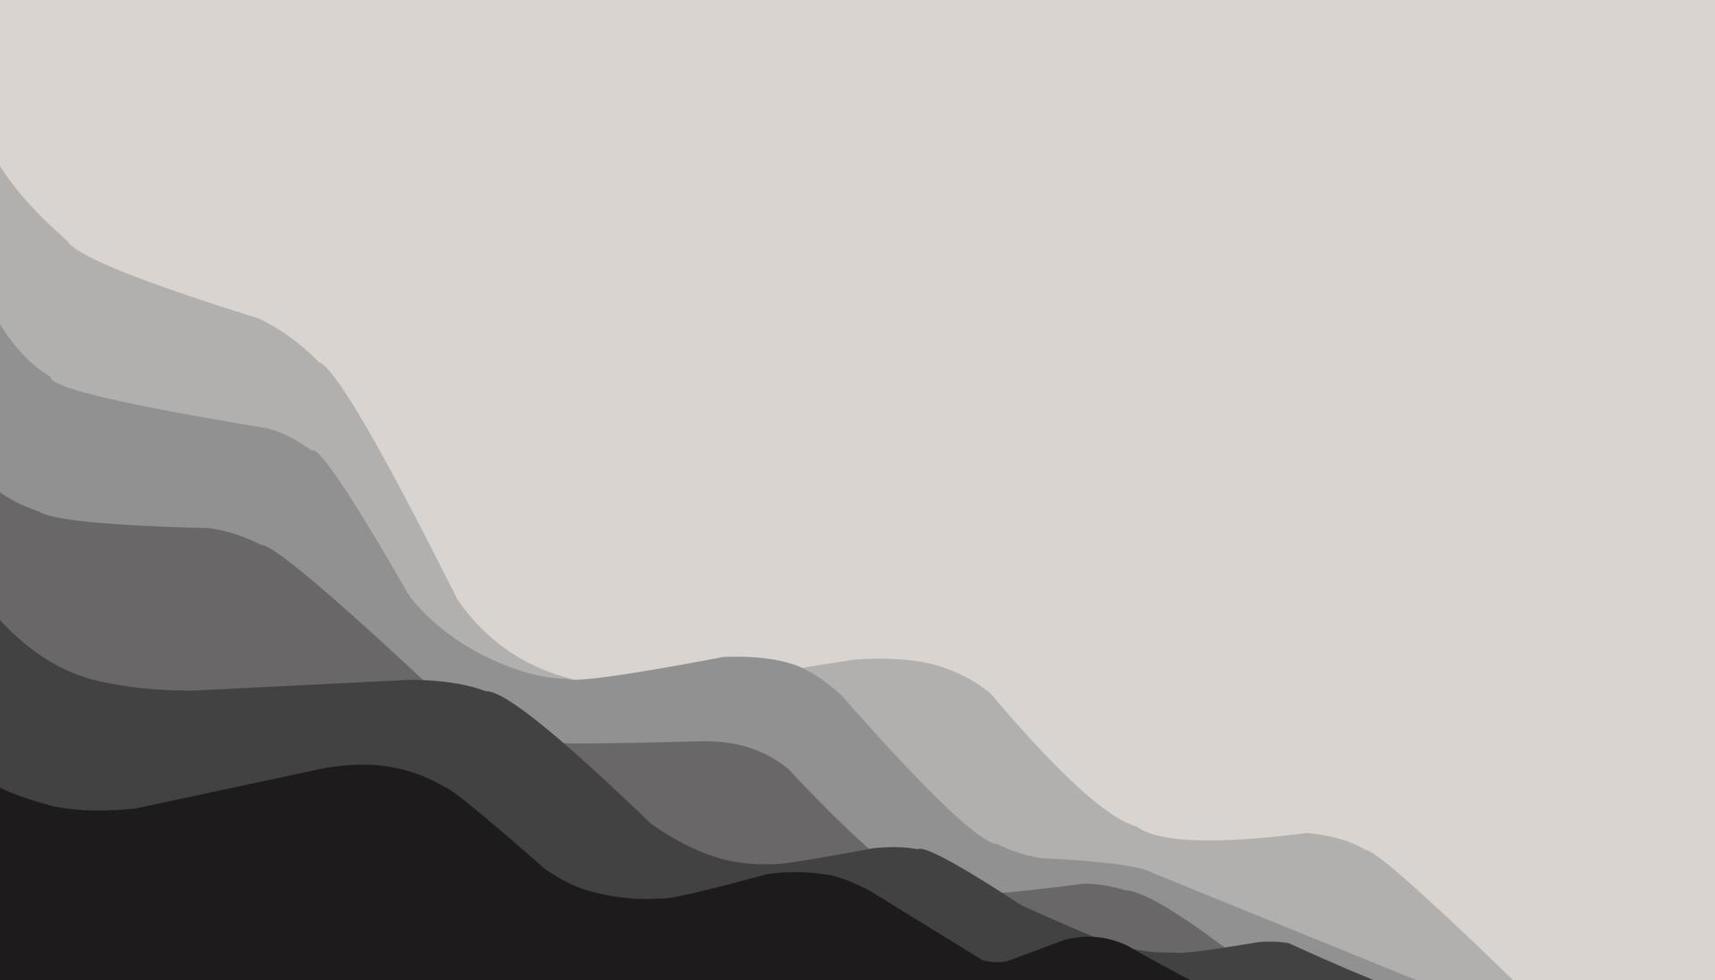 Abstract background illustration of black waves vector